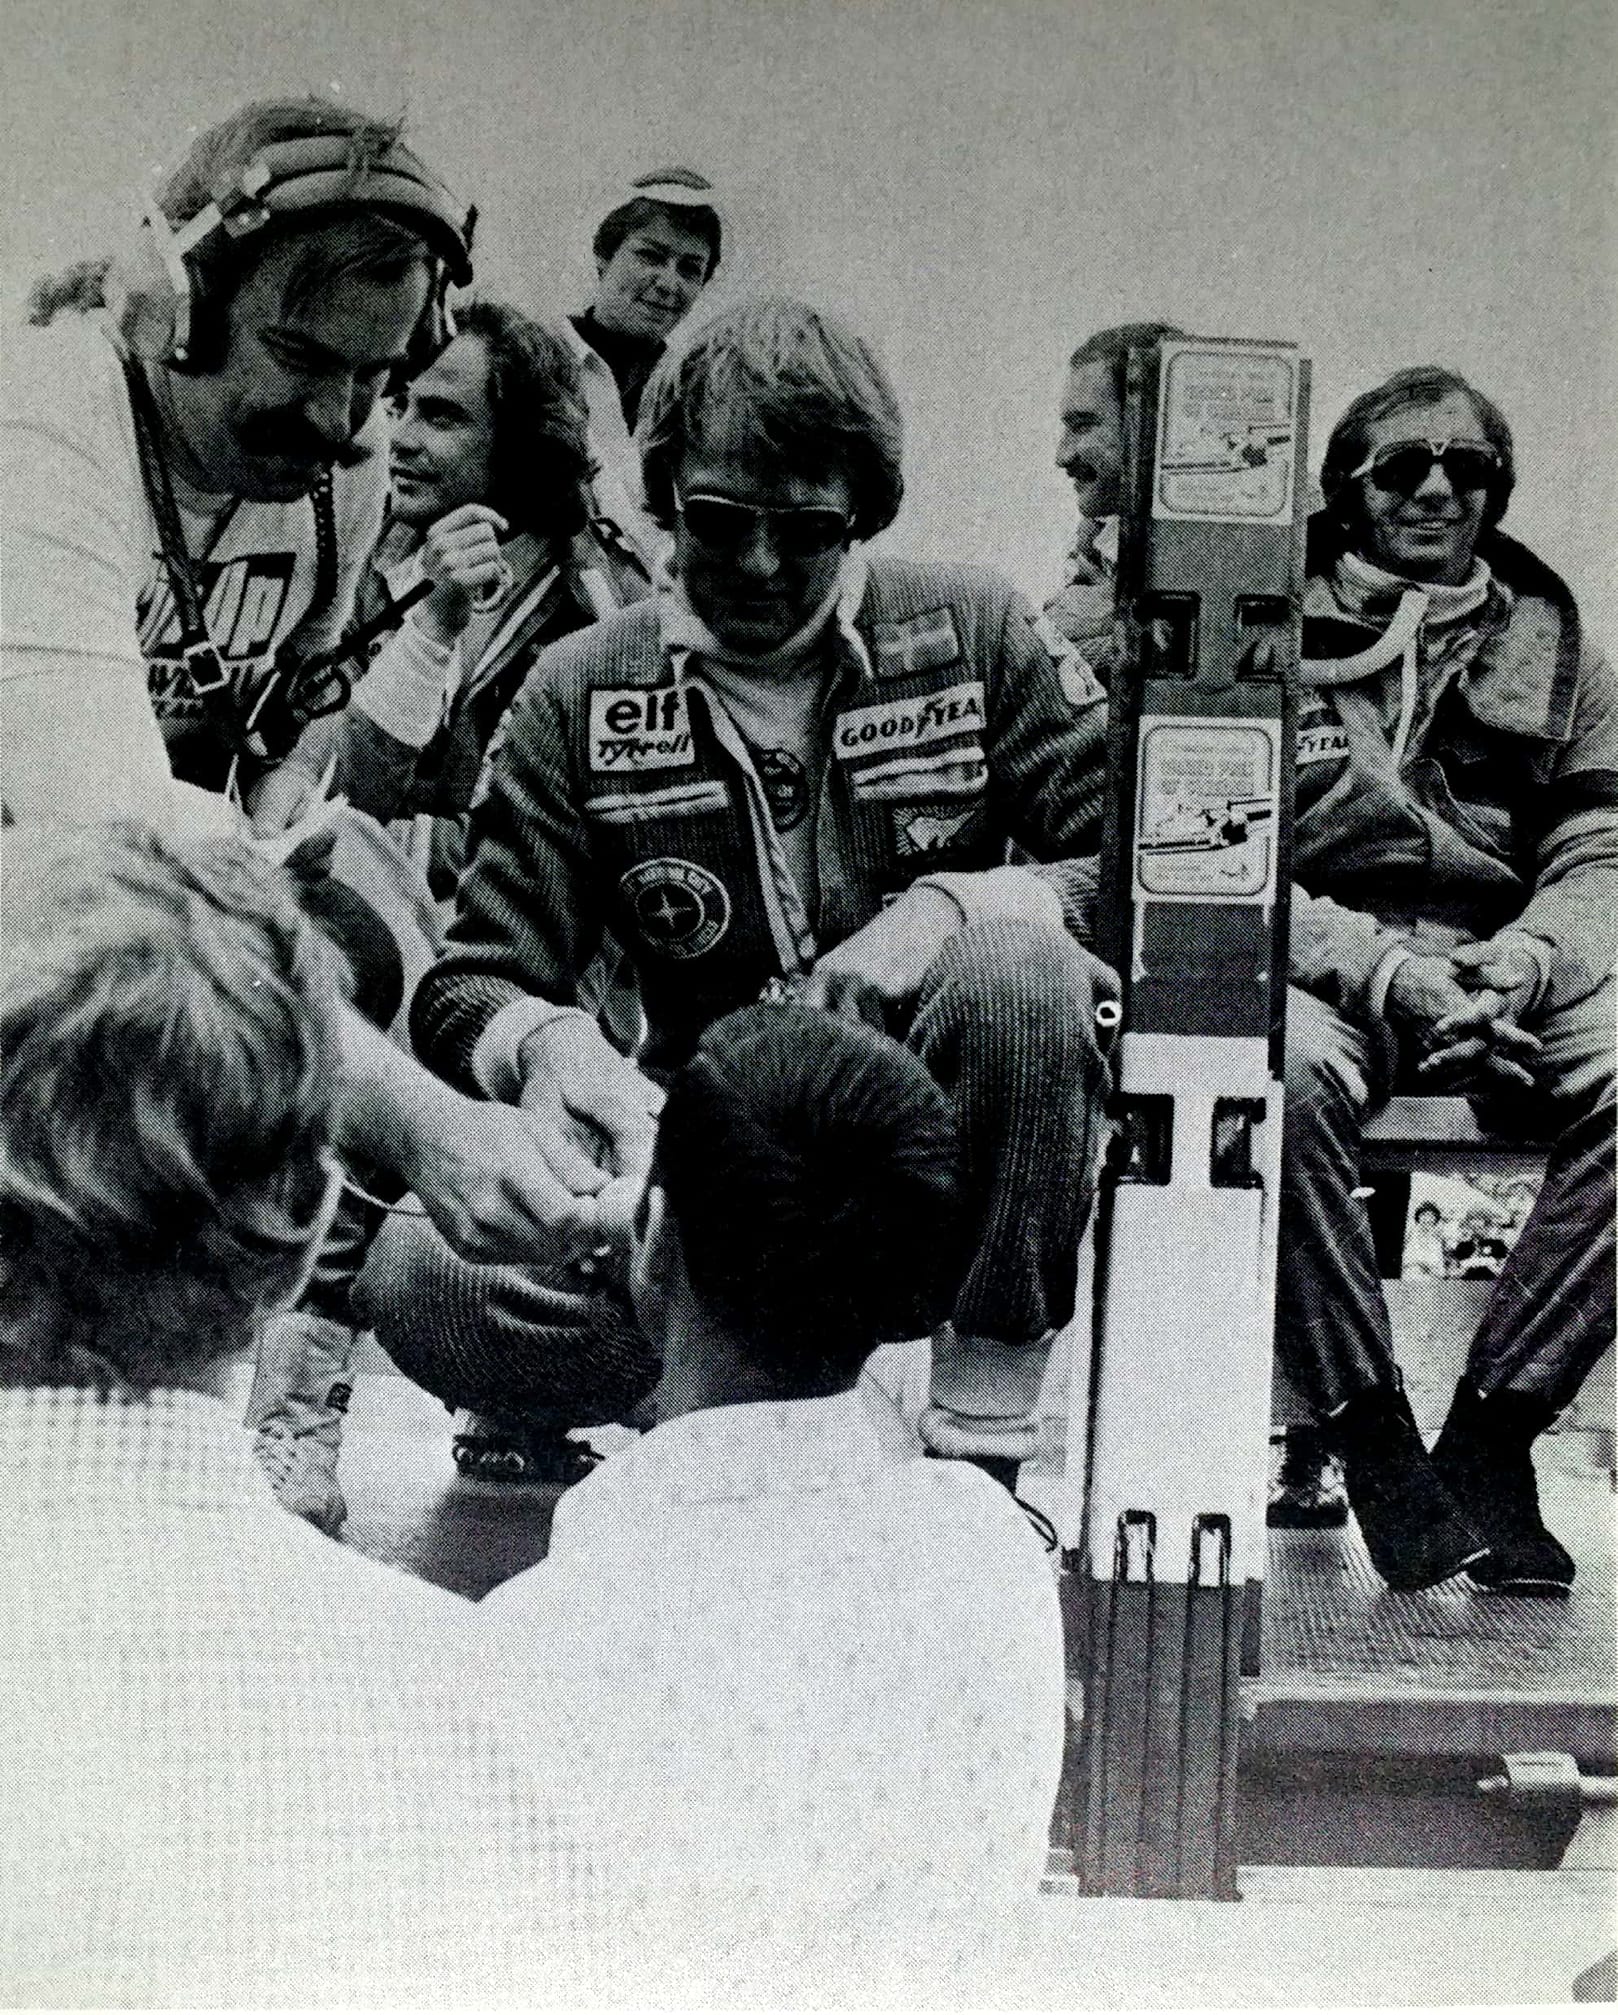 Ronnie Peterson at Anderstorp in 1977 gets a prize from all Swedish F3 drivers for all he has done for Swedish racing community.